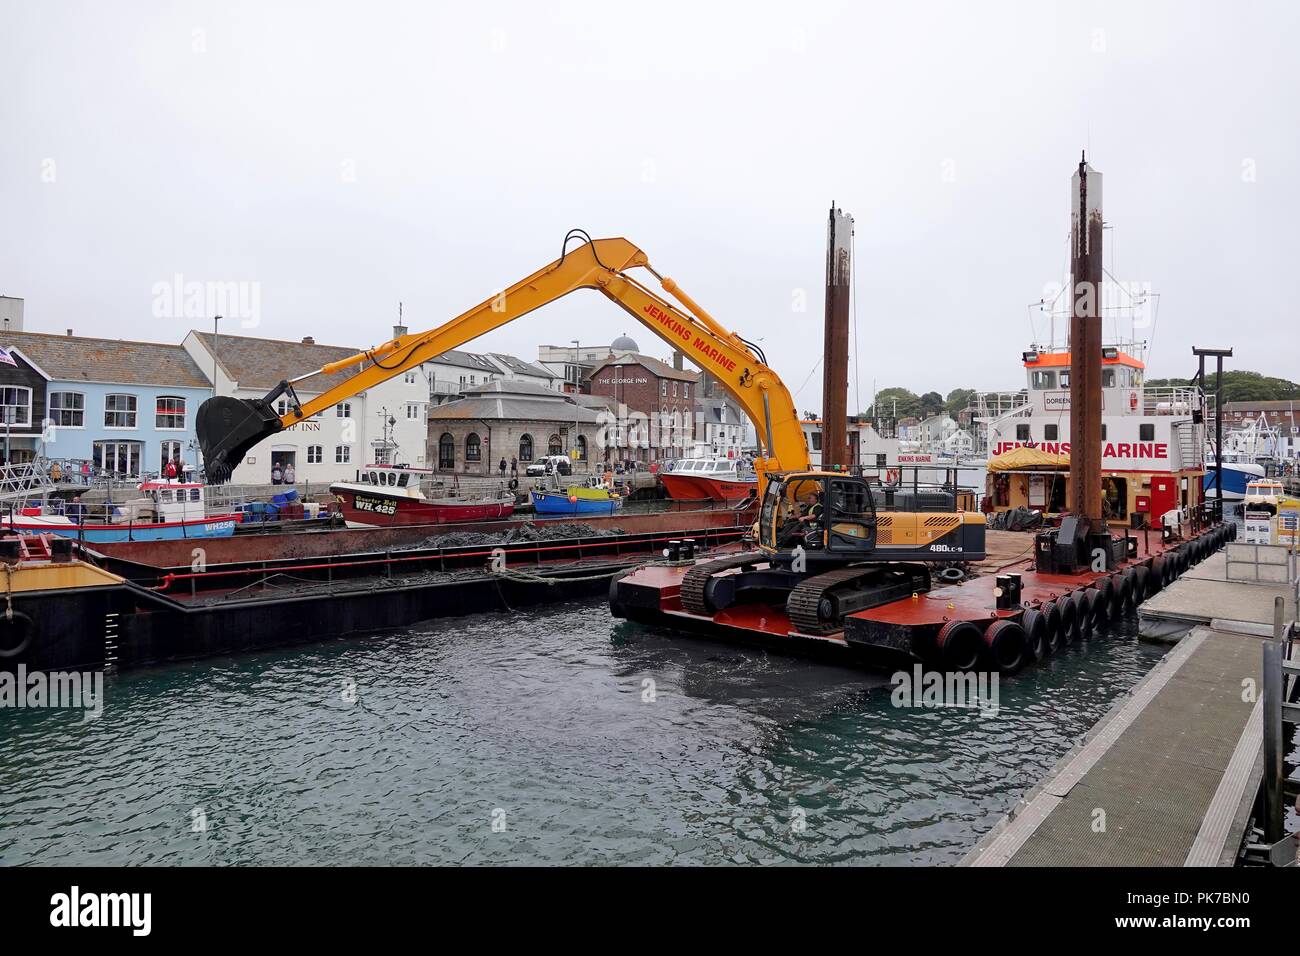 Harbour Dredging, Weymouth, Dorset, UK. 11th September, 2018. Dredging operations taking place in Weymouth Outer Harbour. The dredging platform is supported by 2 hopper barges that will transit the waste material for disposal. Credit: Finnbarr Webster/Alamy Live News Stock Photo